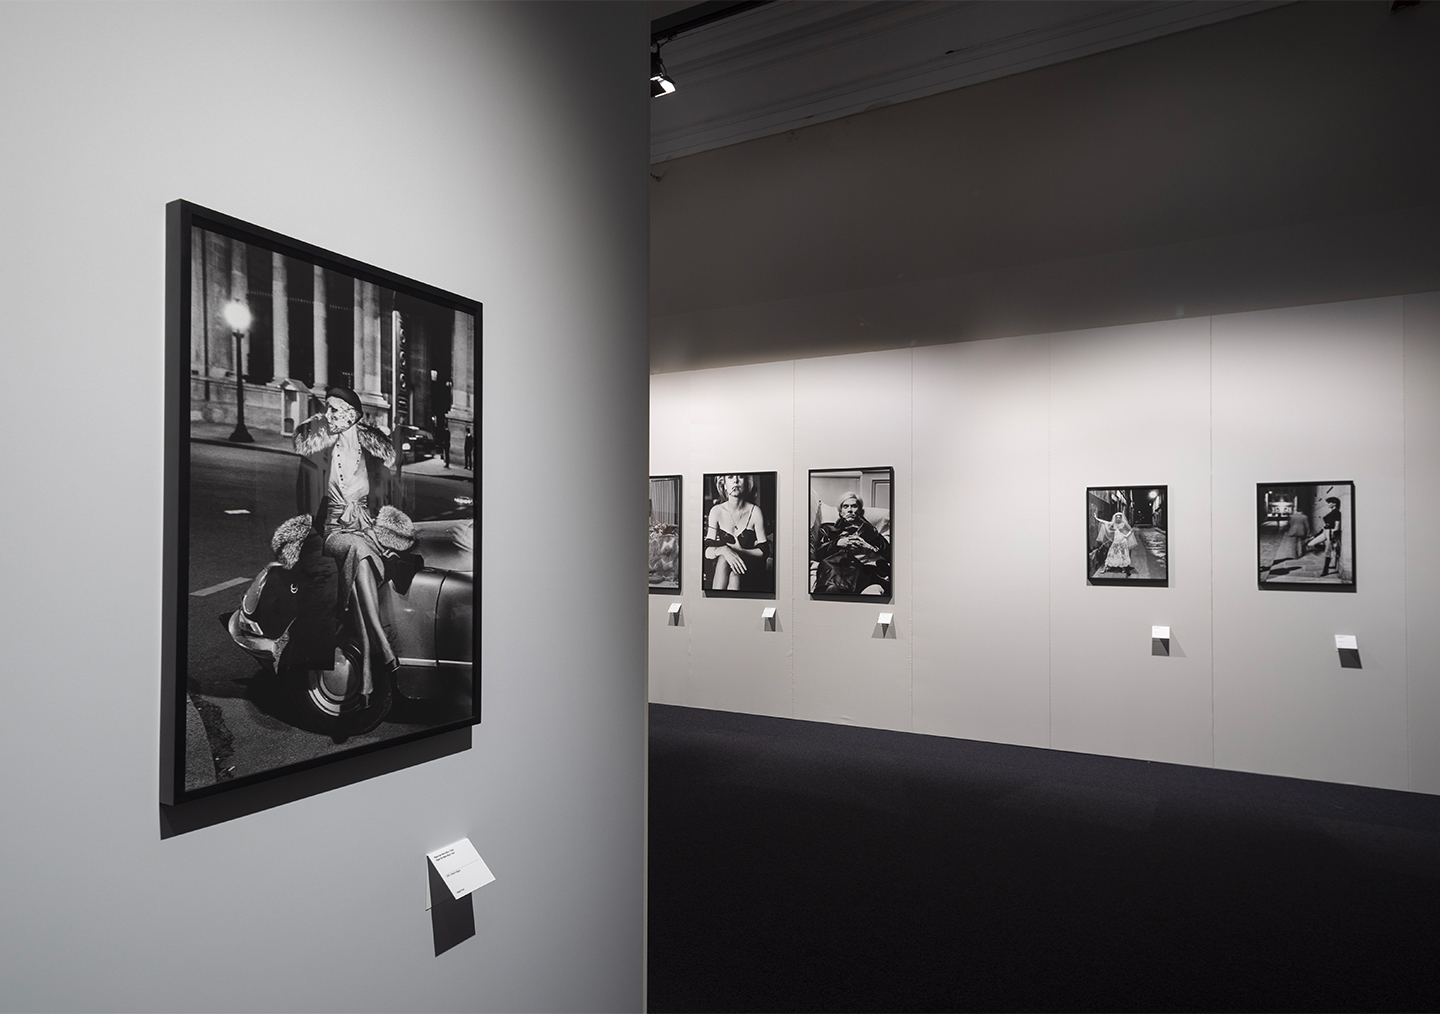 The “HELMUT NEWTON. LEGACY” exhibition at Palazzo Reale © Luca Zanon